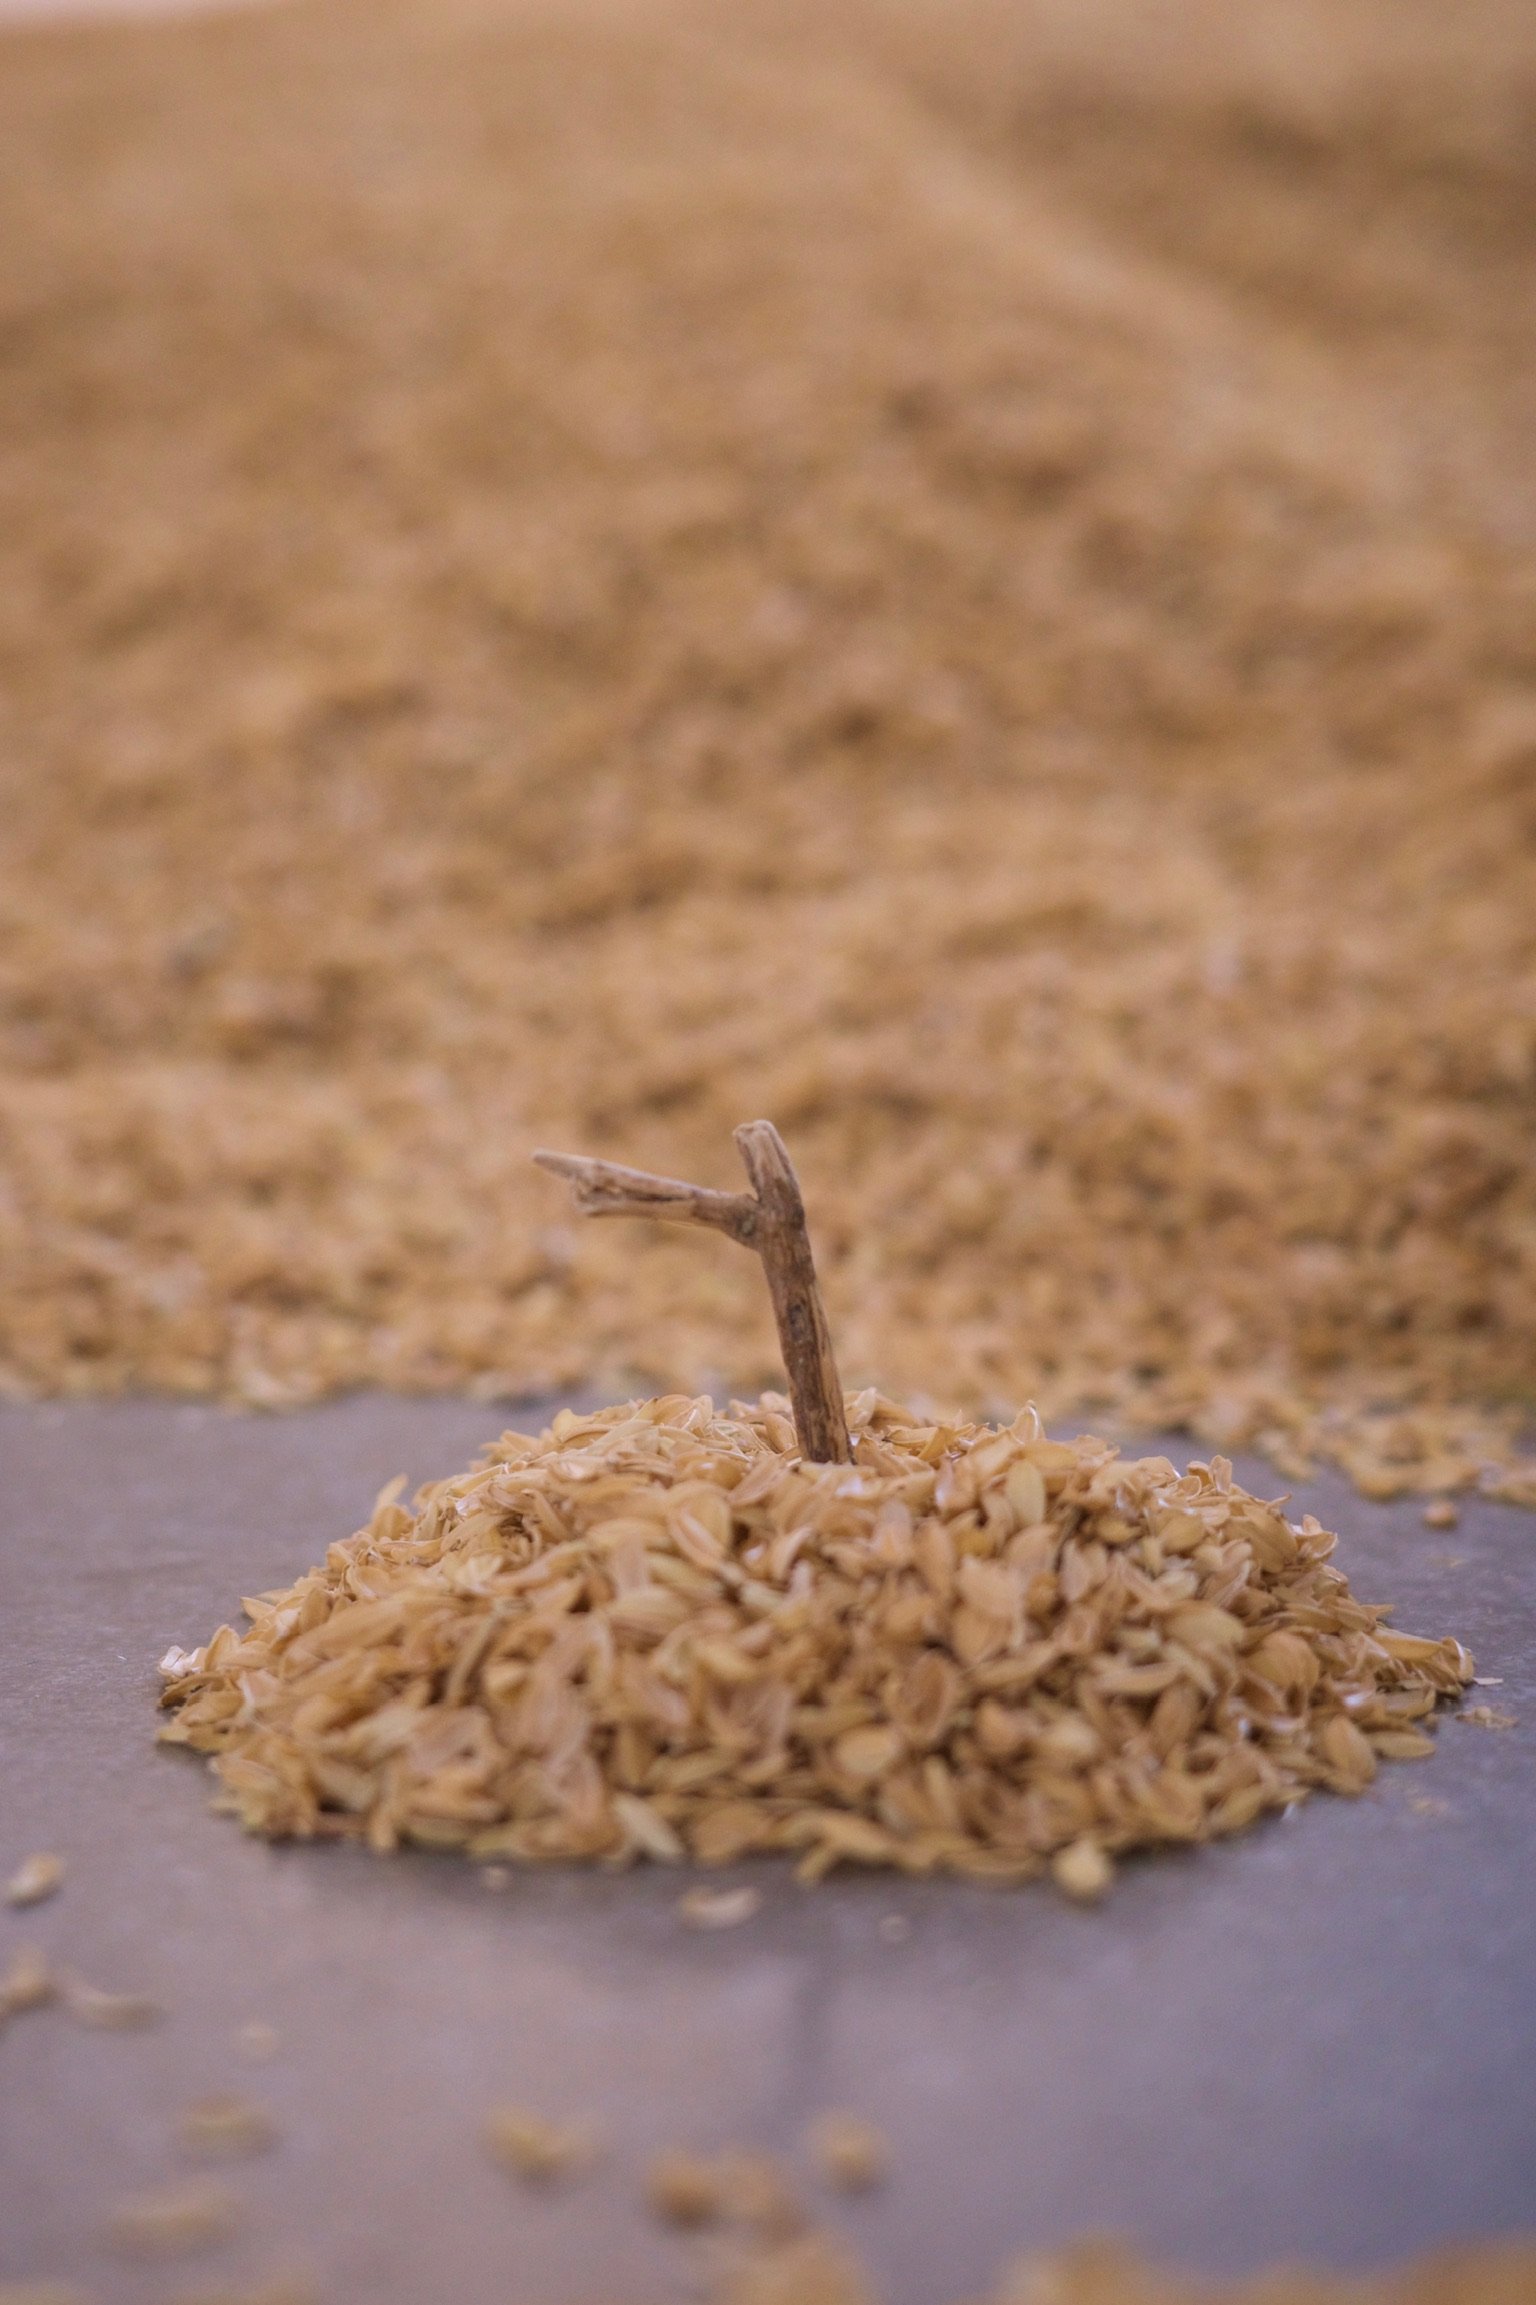 Twig atop a mont of chaff in front of a ton of chaff.